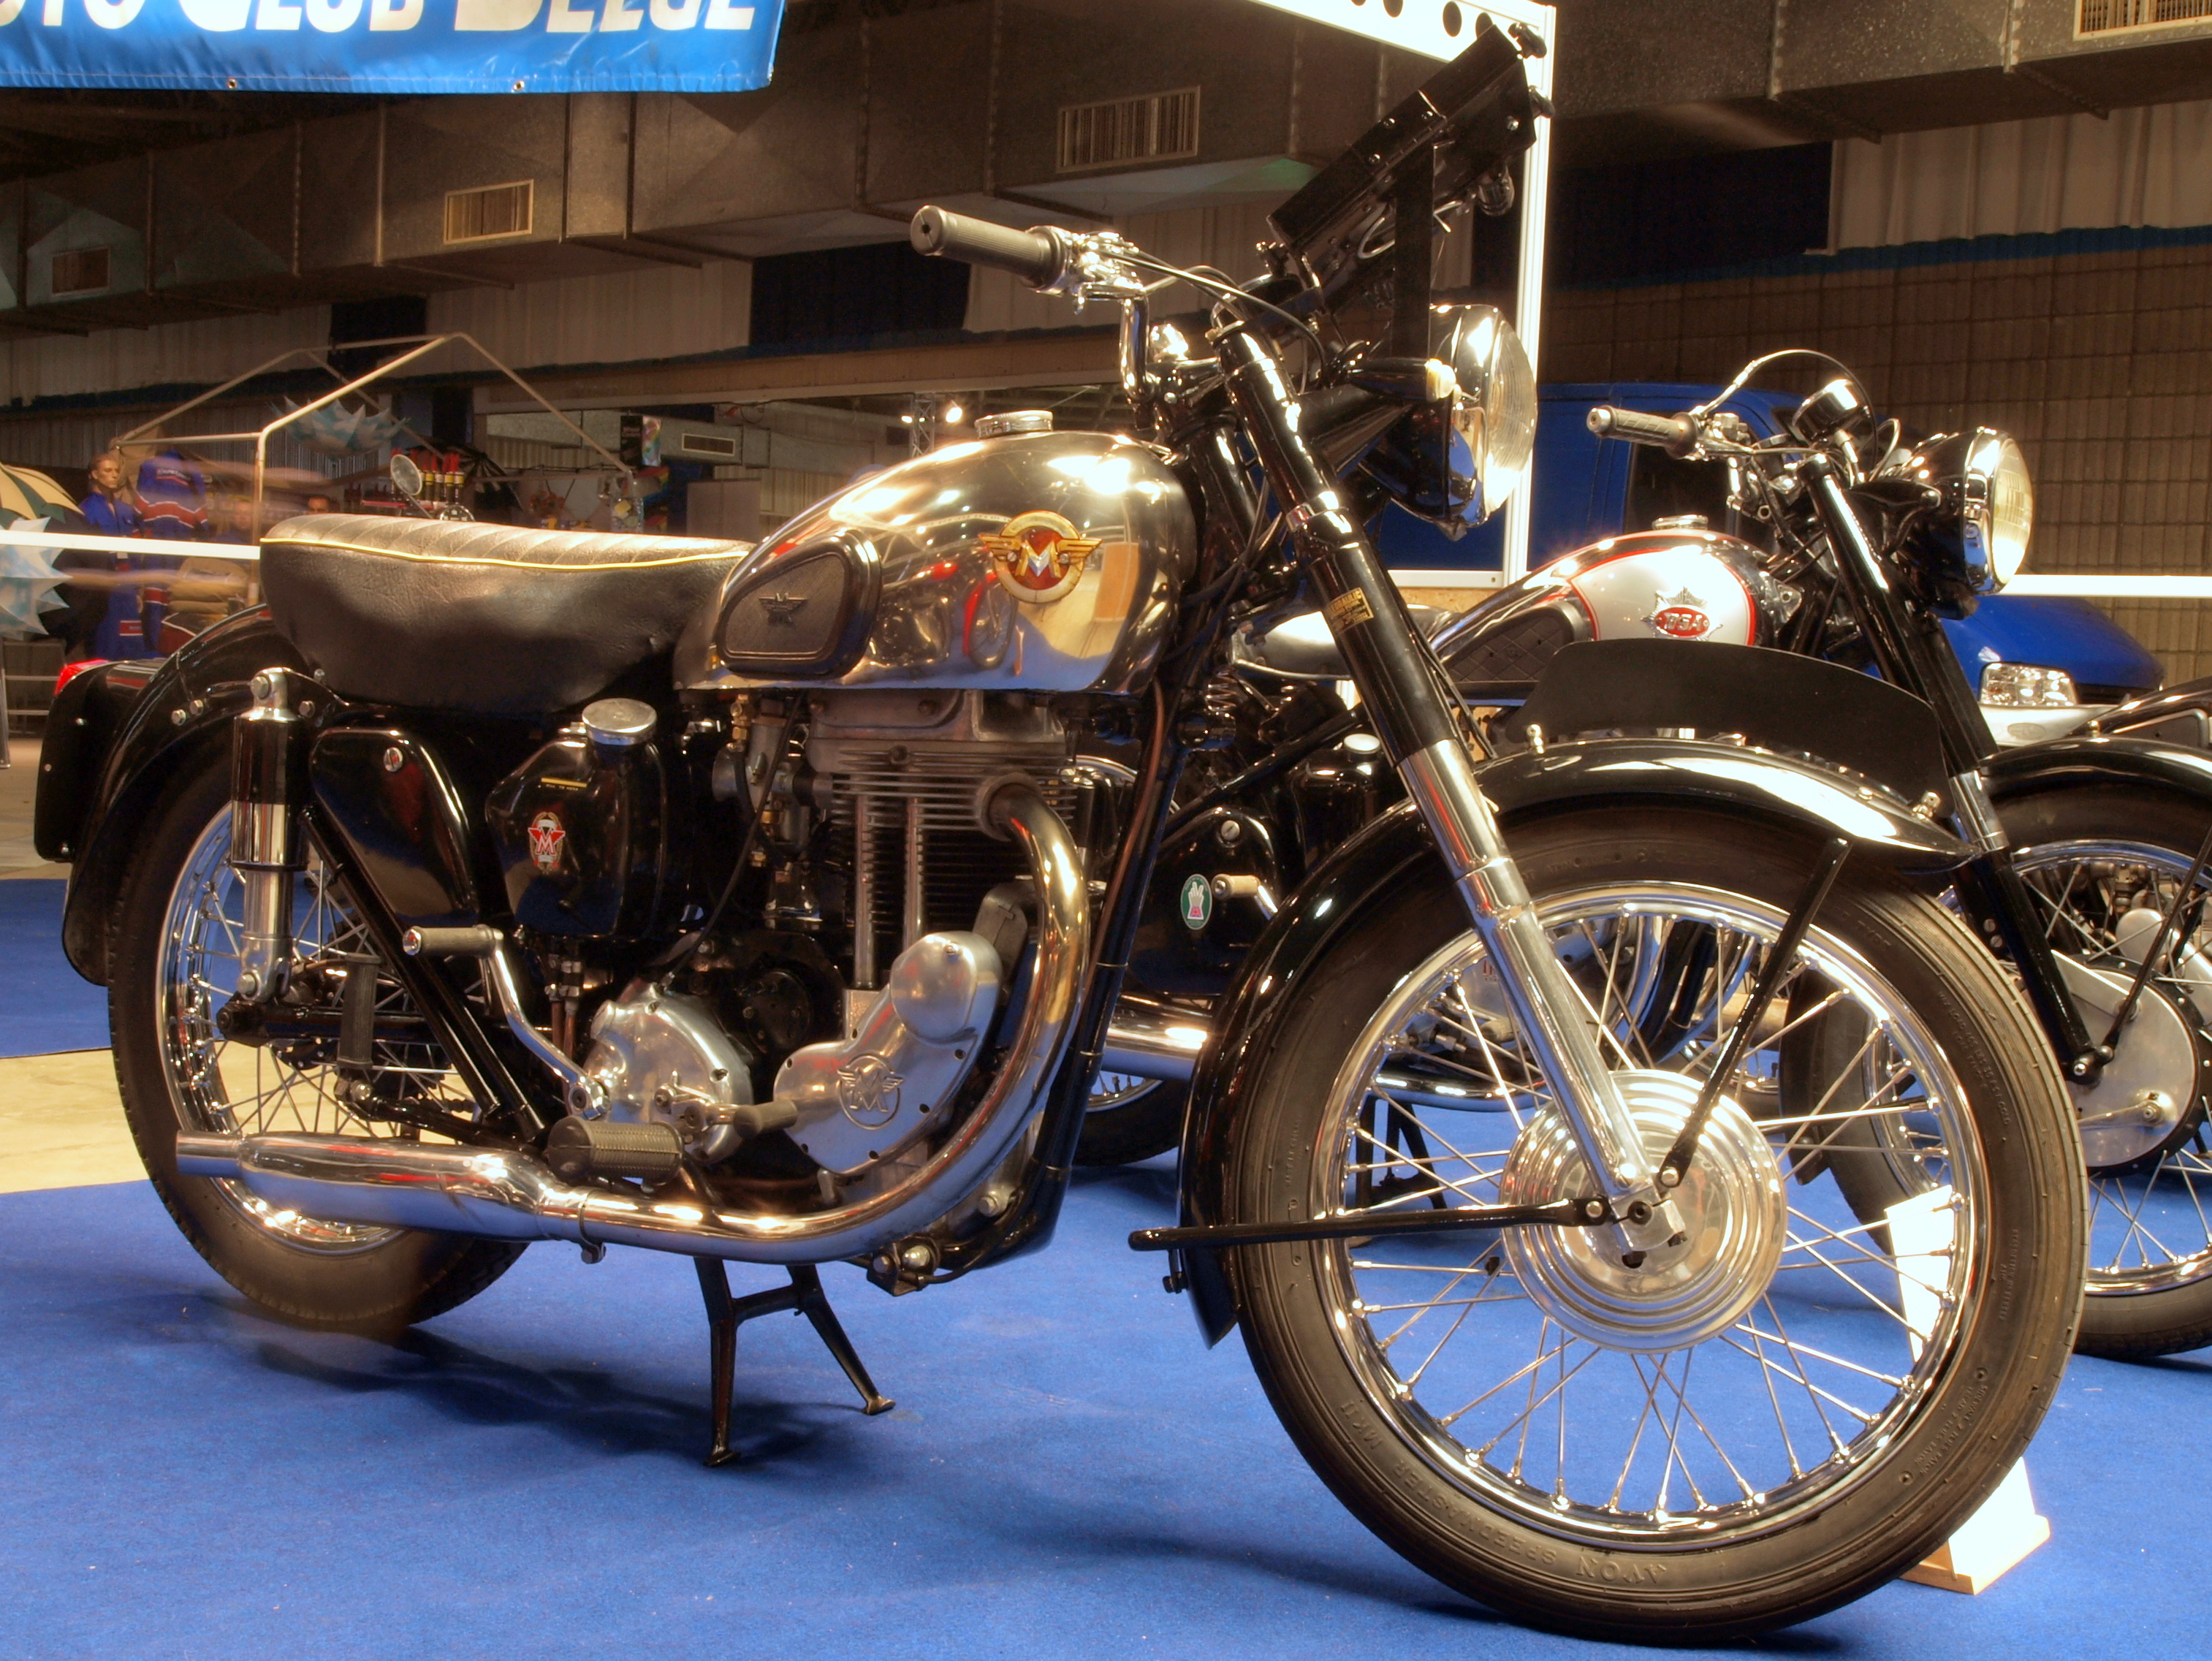 The Matchless G 80 E one of the vintage bikes from the late 80s #8